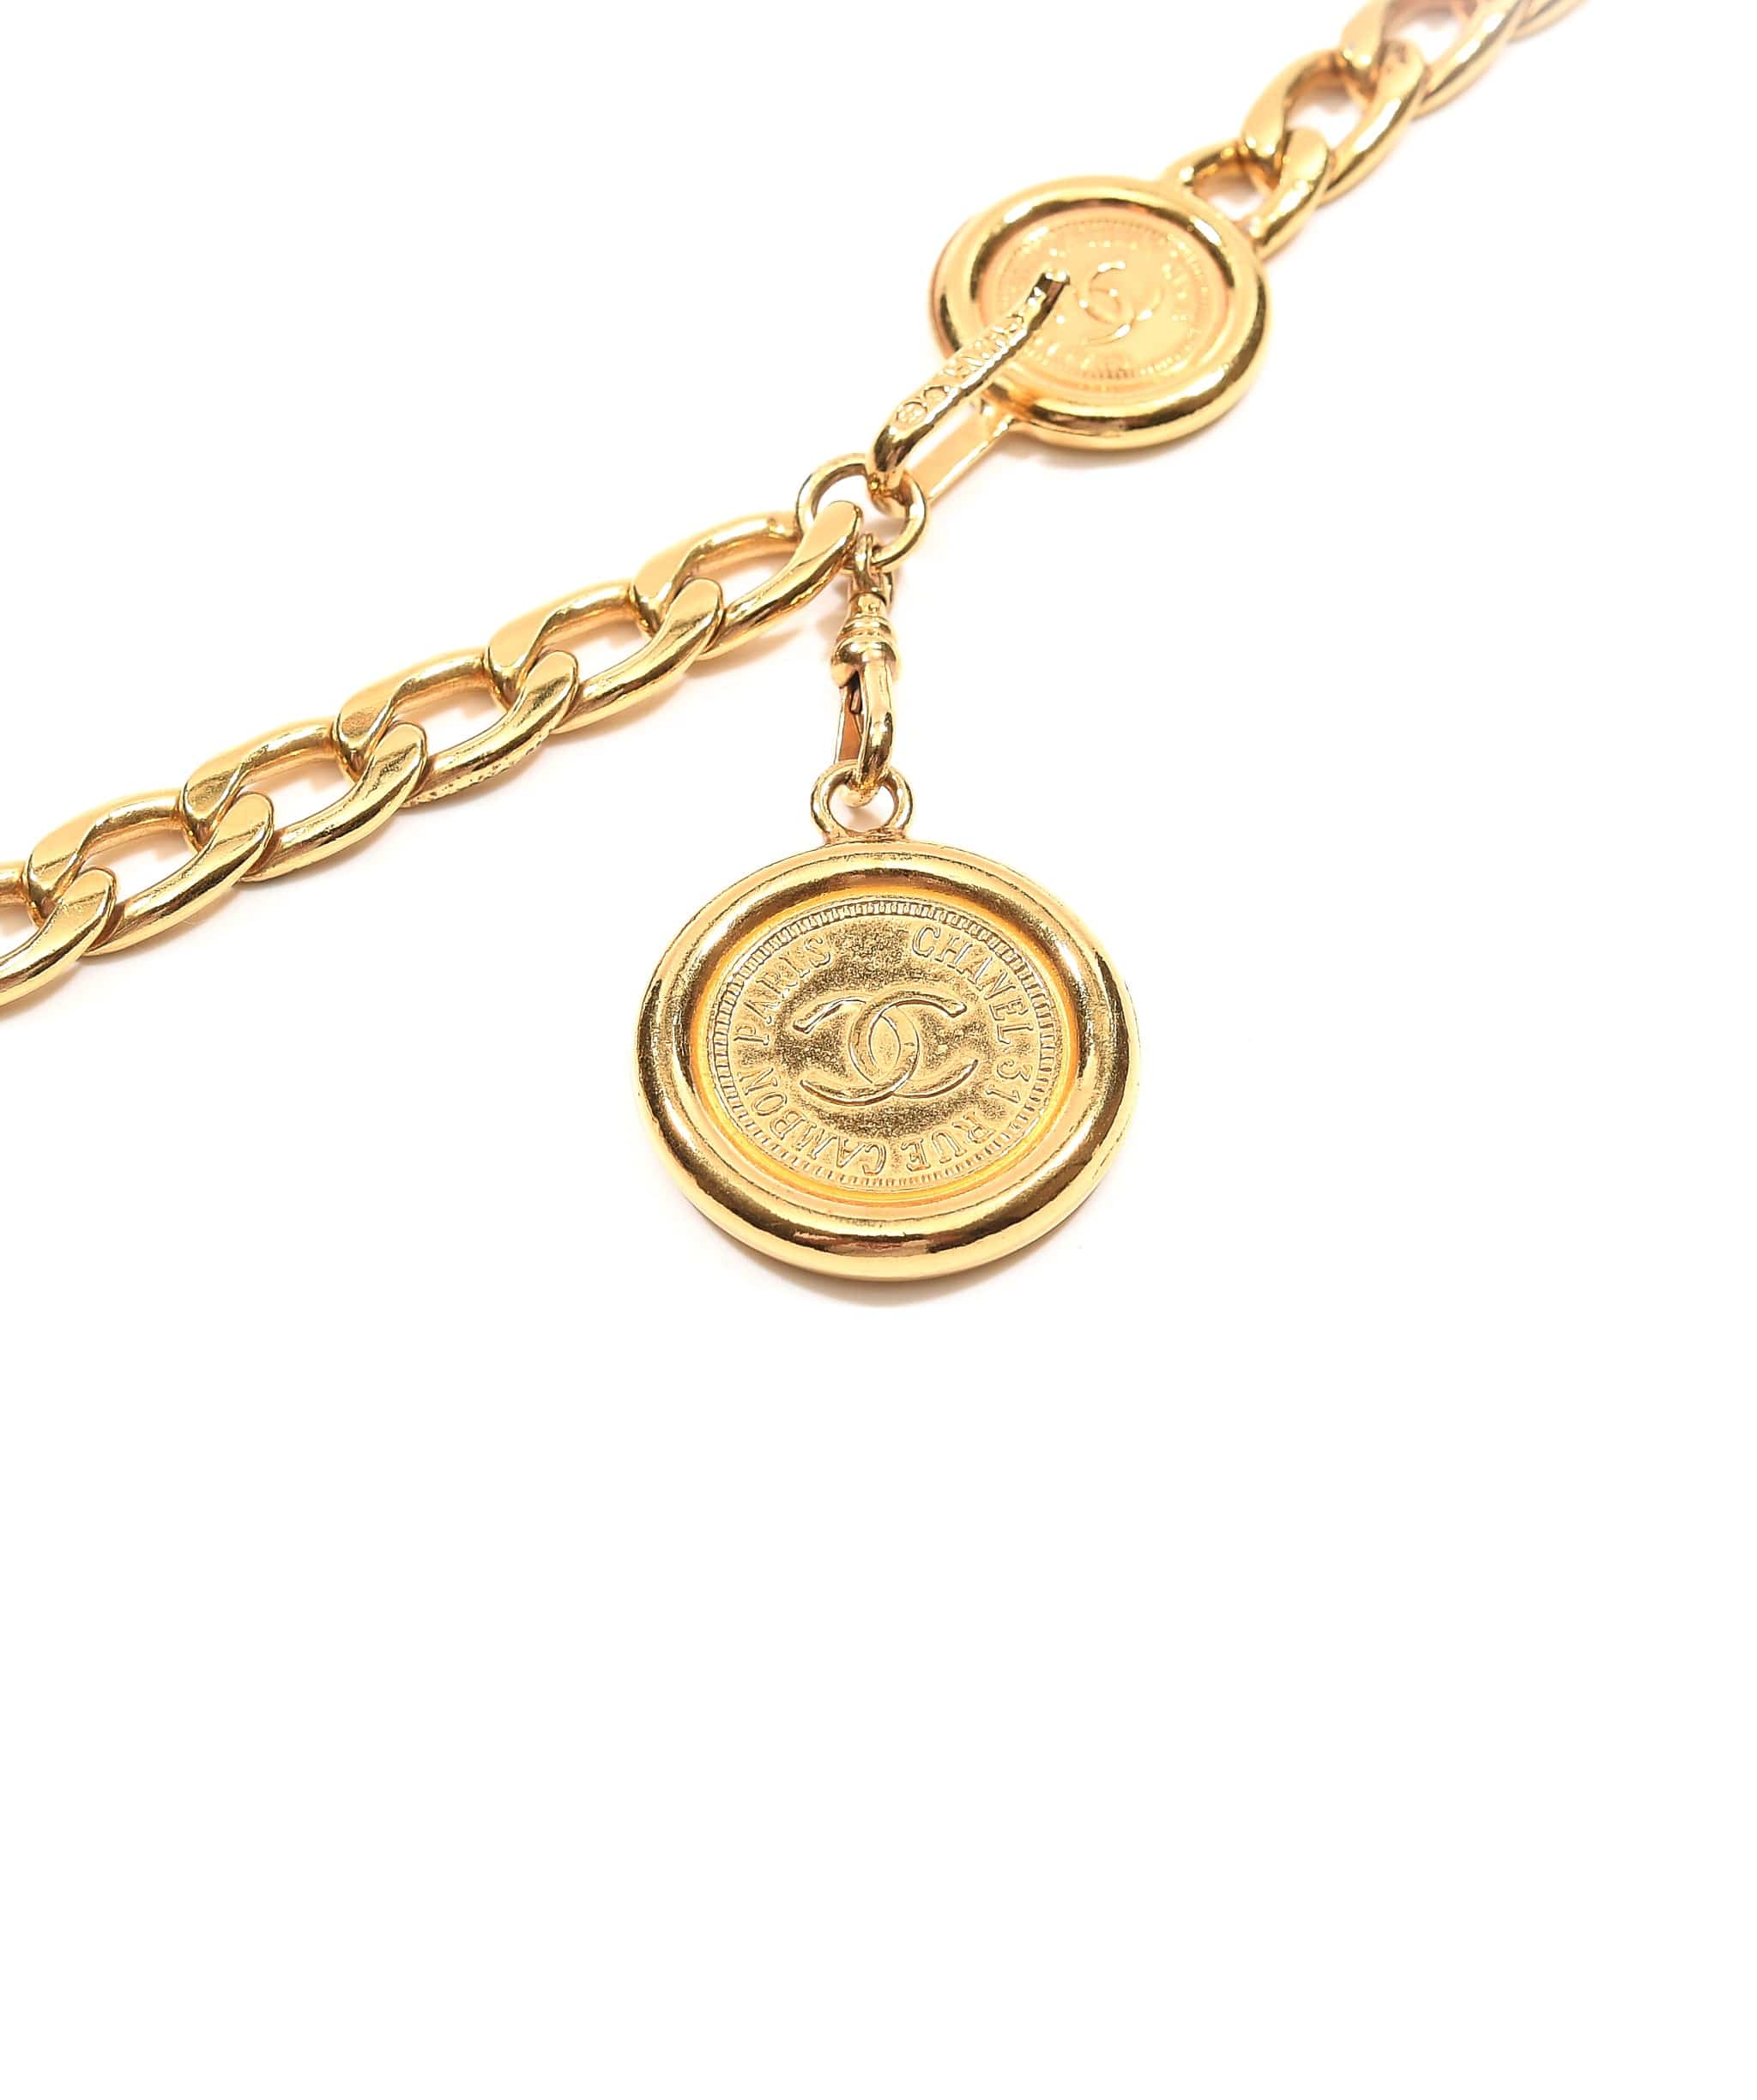 Chanel Preloved Chanel Vintage Chain Belt with 6 CC Medallions SKC1061